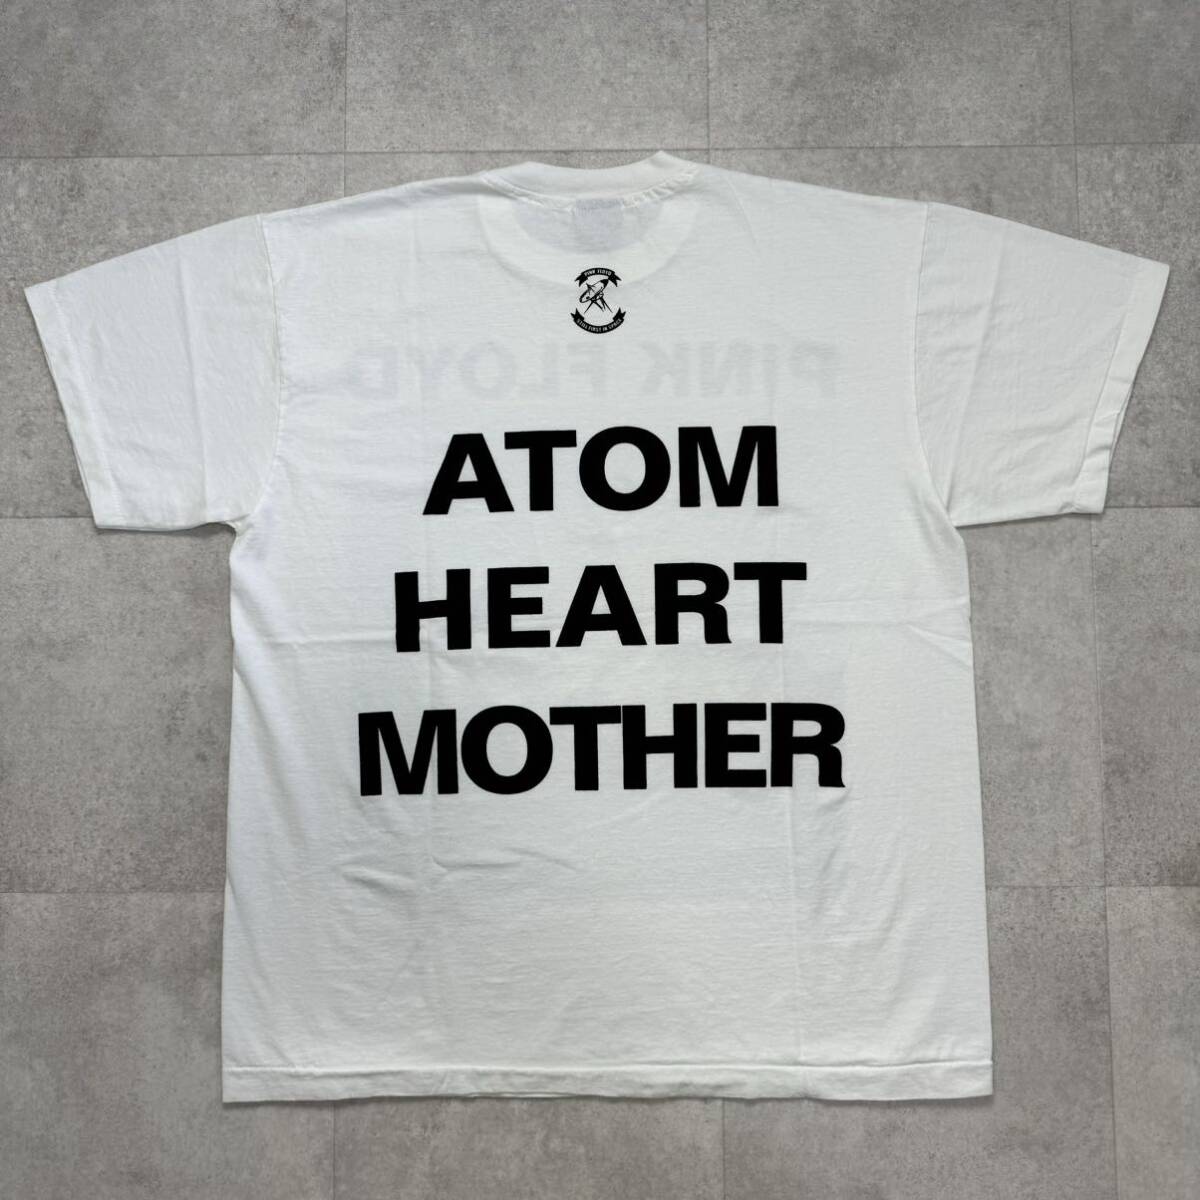 PINK FLOYD STILL FIRST IN SPACE ATOM HEART MOTHER ピンクフロイド tee Tシャツ_画像6